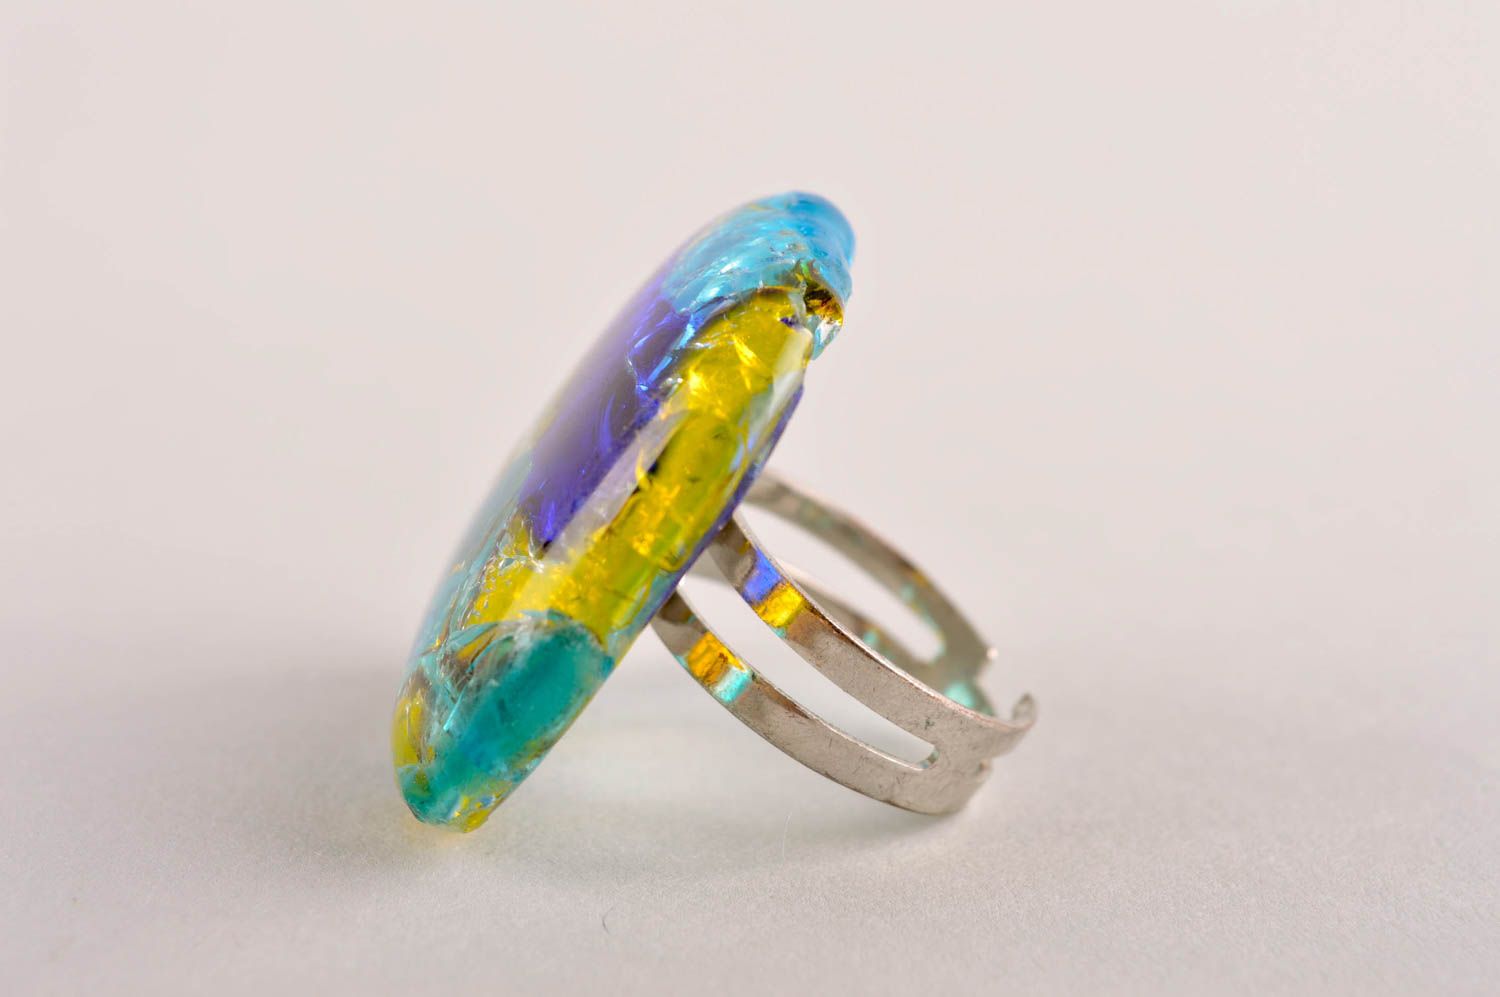 Handmade ring unusual ring glass ring gift ideas unusual glass accessory photo 3